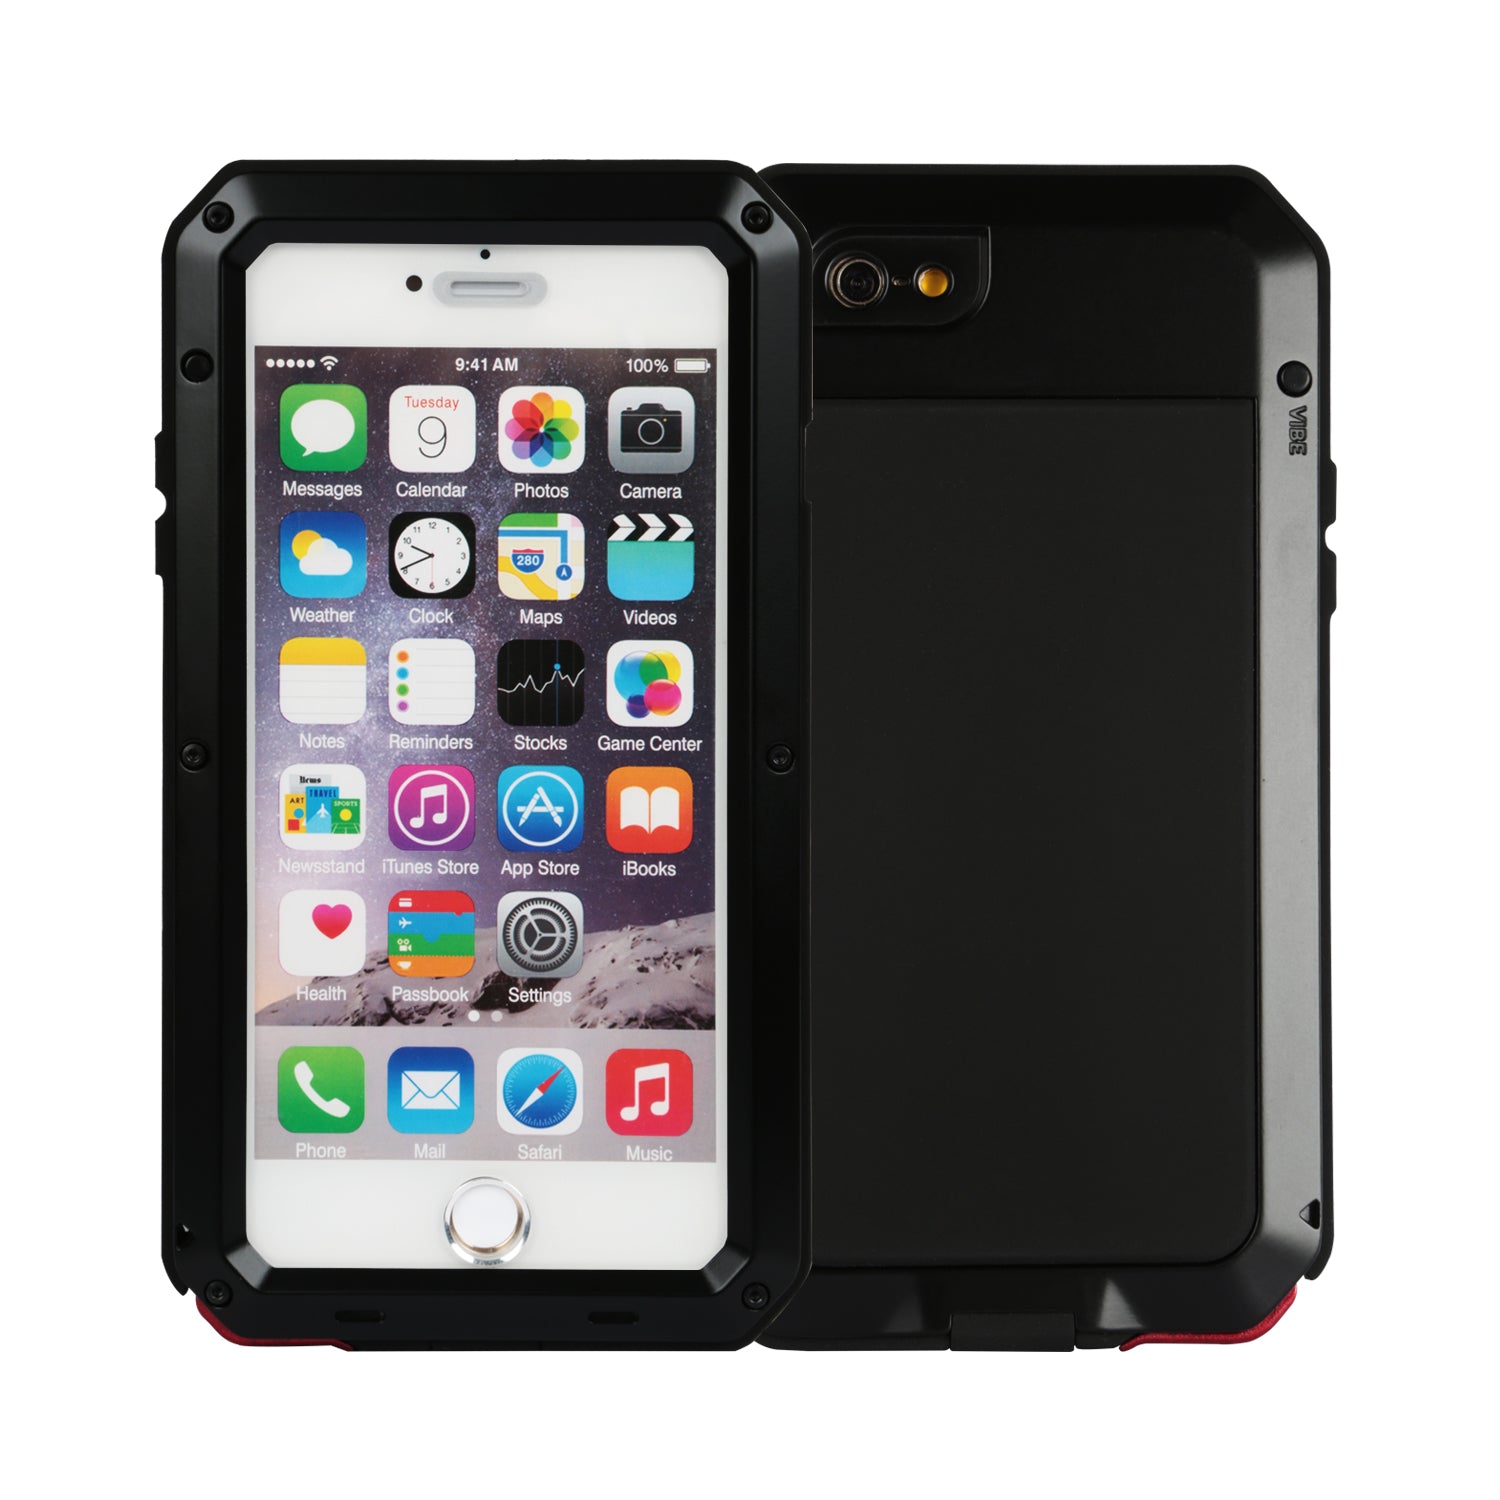 title:Rugged Shock-Resistant Hybrid Full Cover Case For iPhone 6 Plus;color:Black